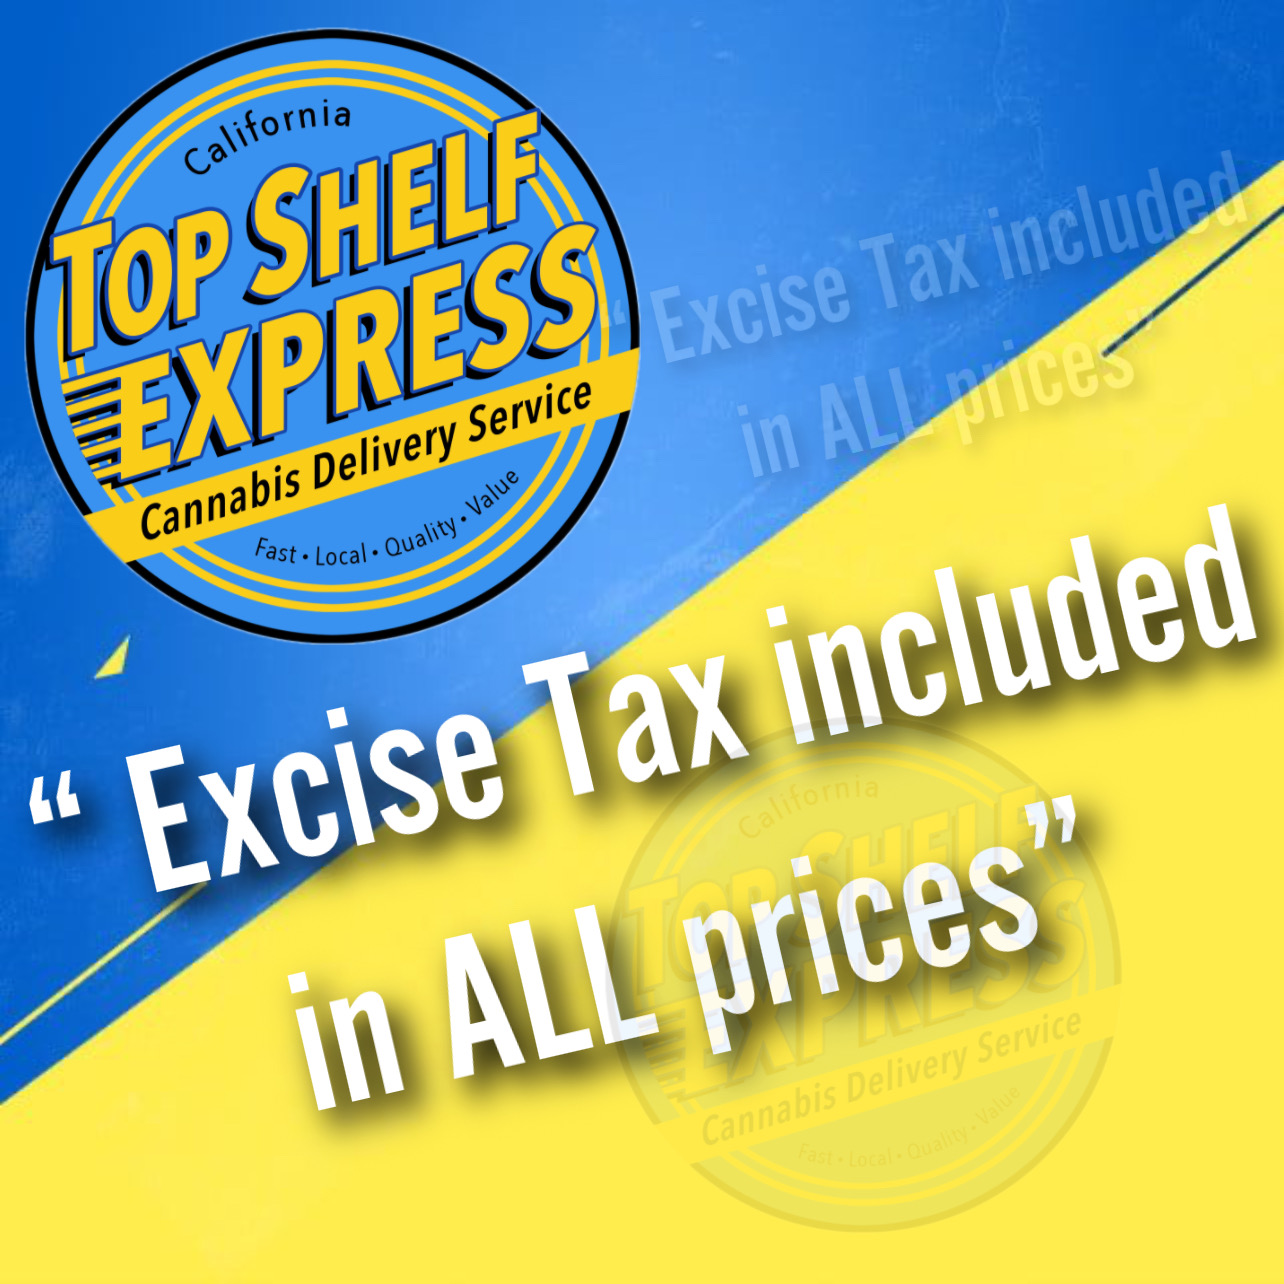 “ Excise Tax included